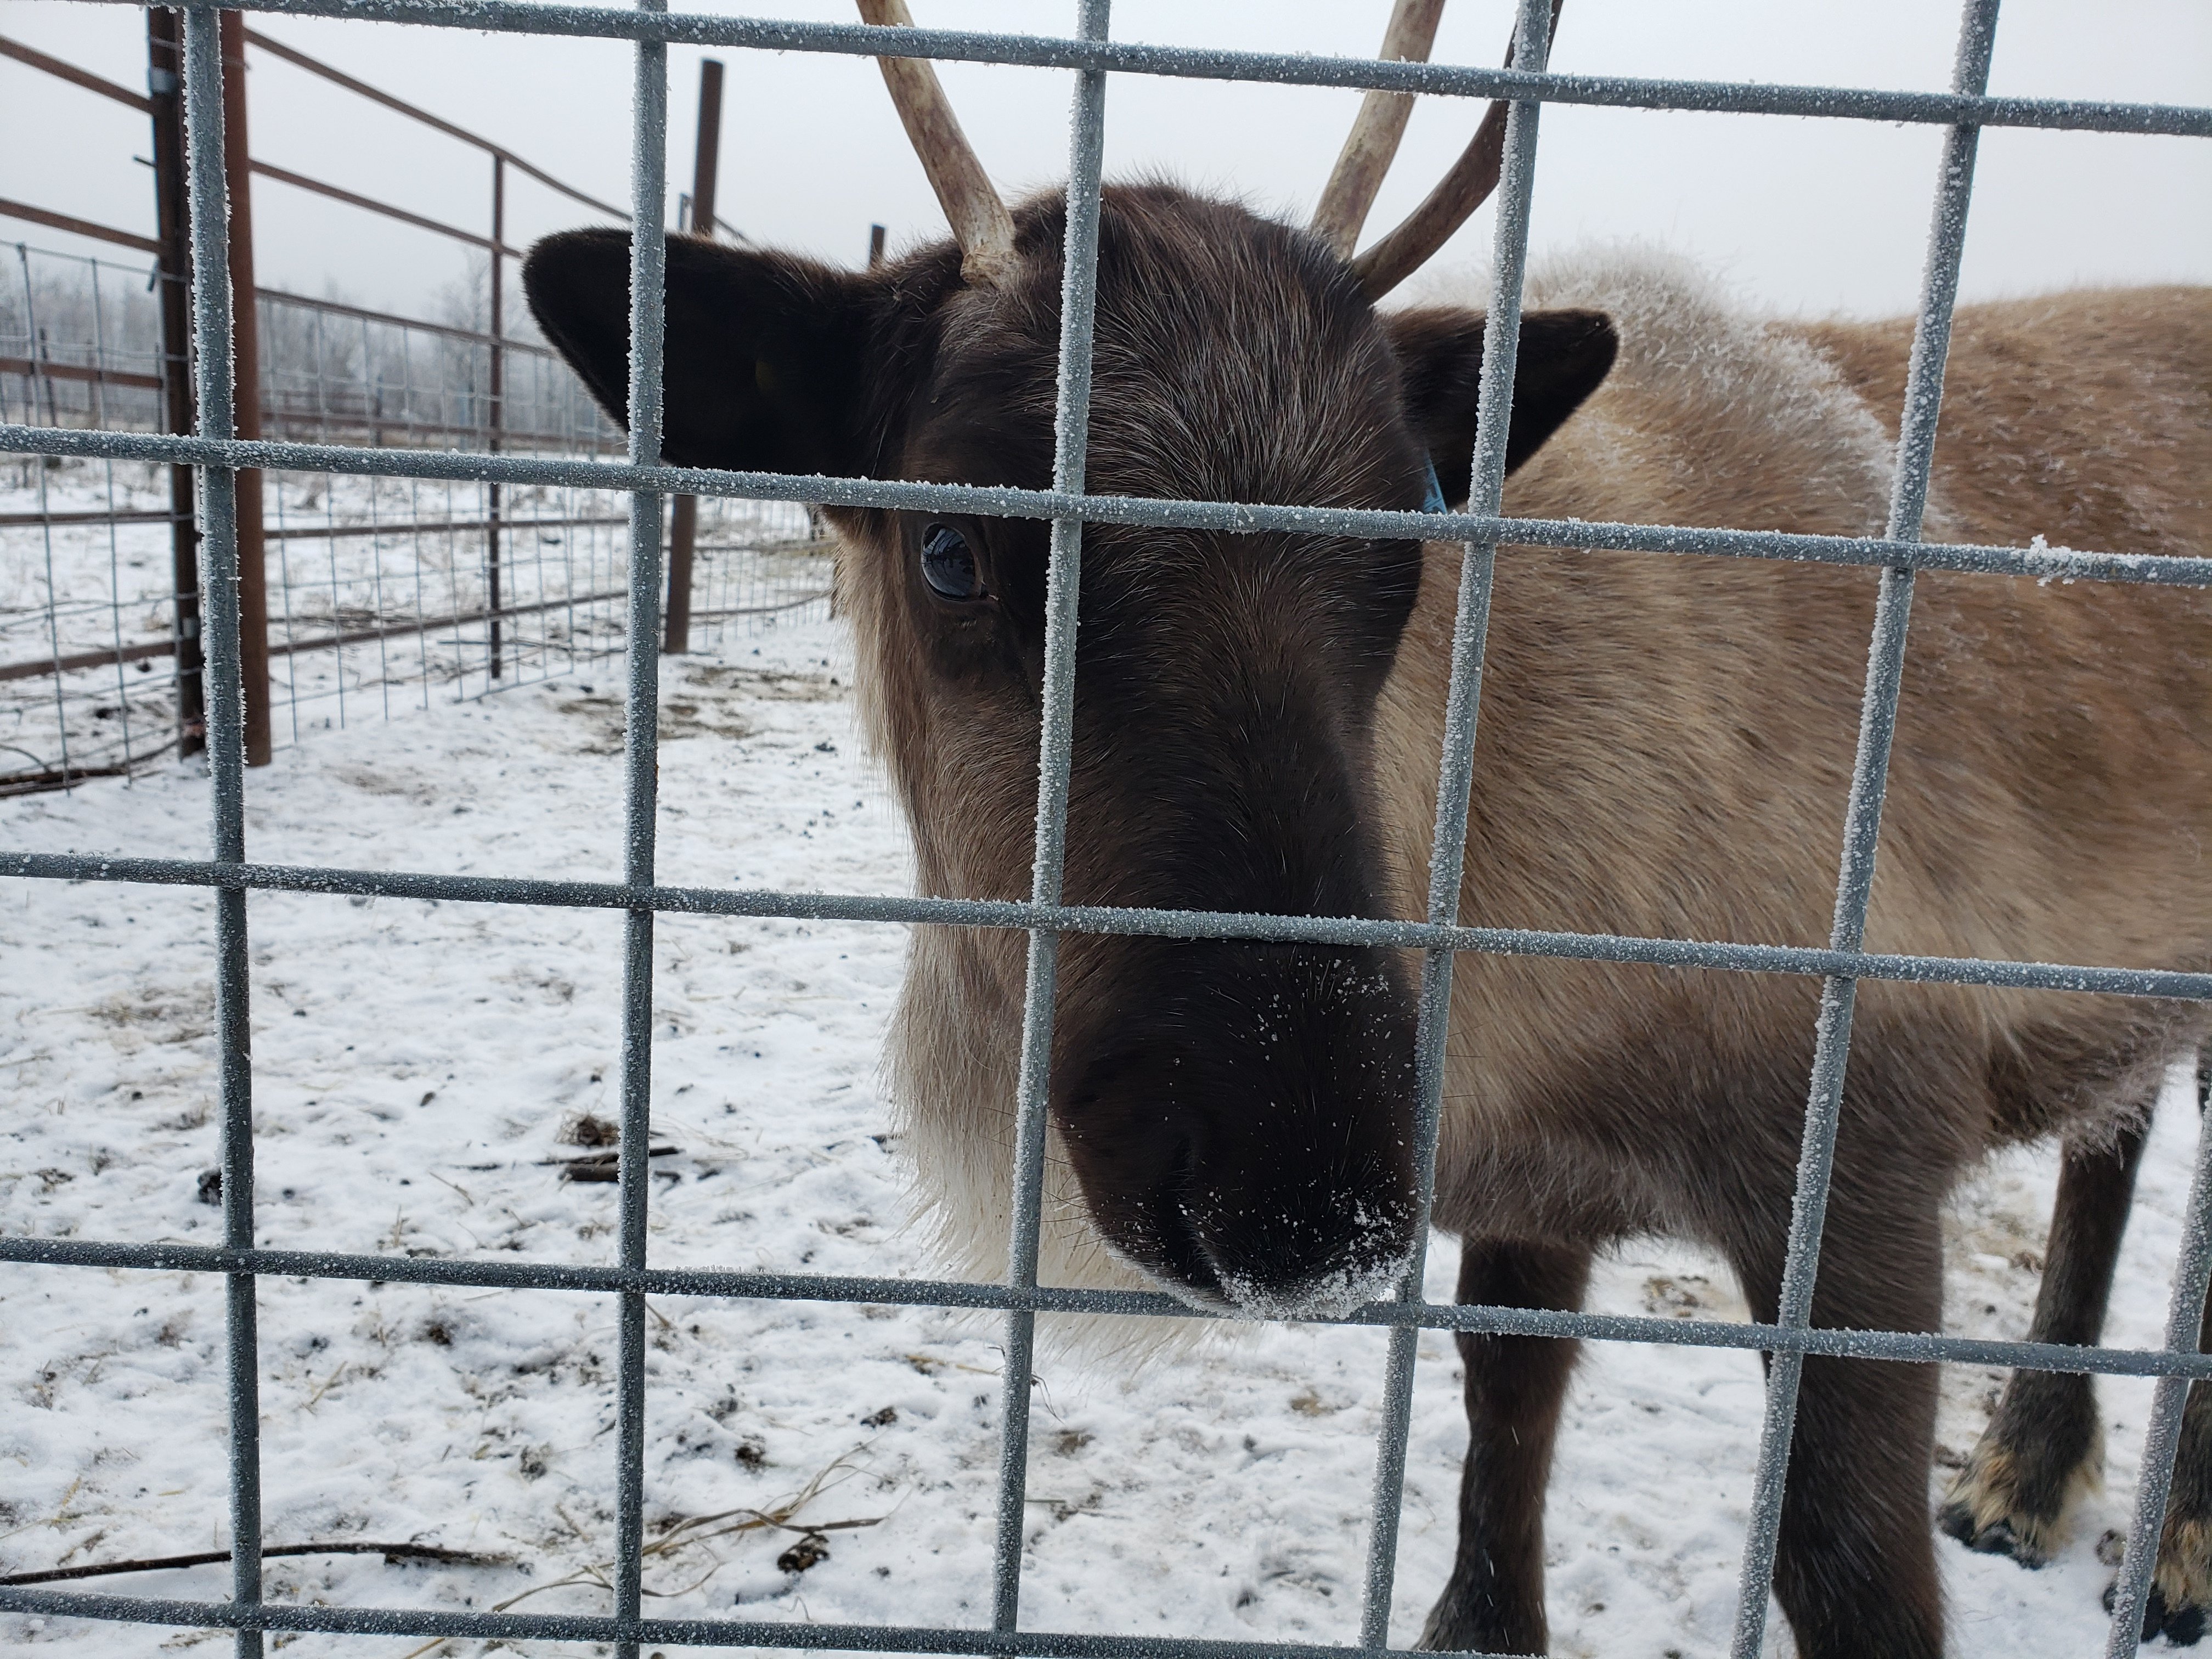 A reindeer in a snowy pen, who may have been used for Christmas events